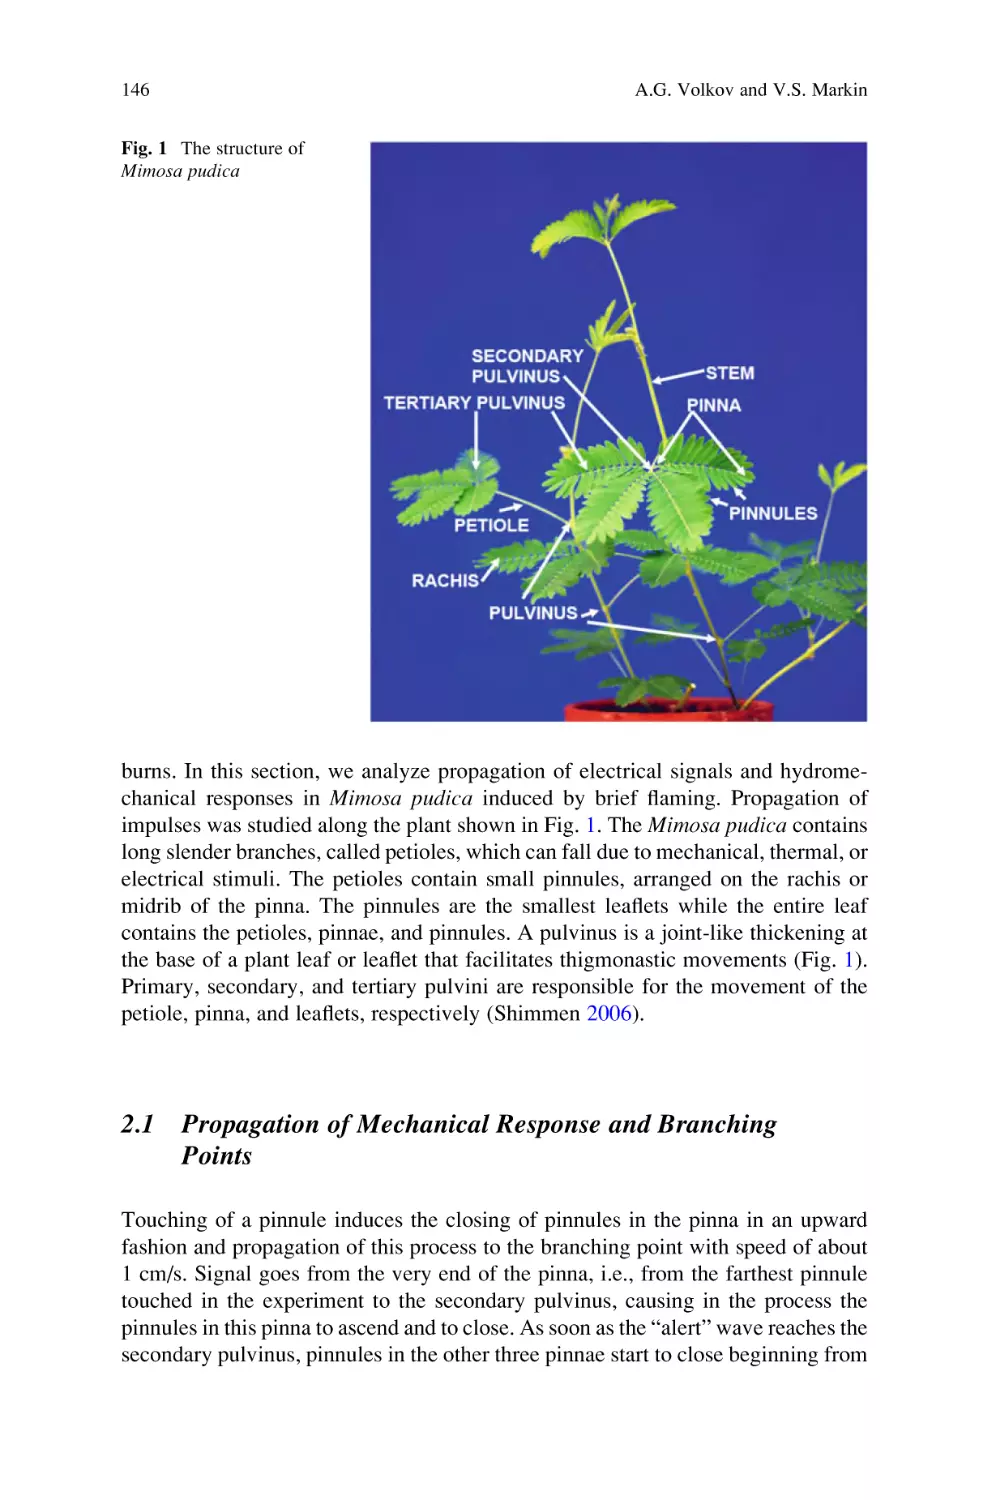 2.1 Propagation of Mechanical Response and Branching Points